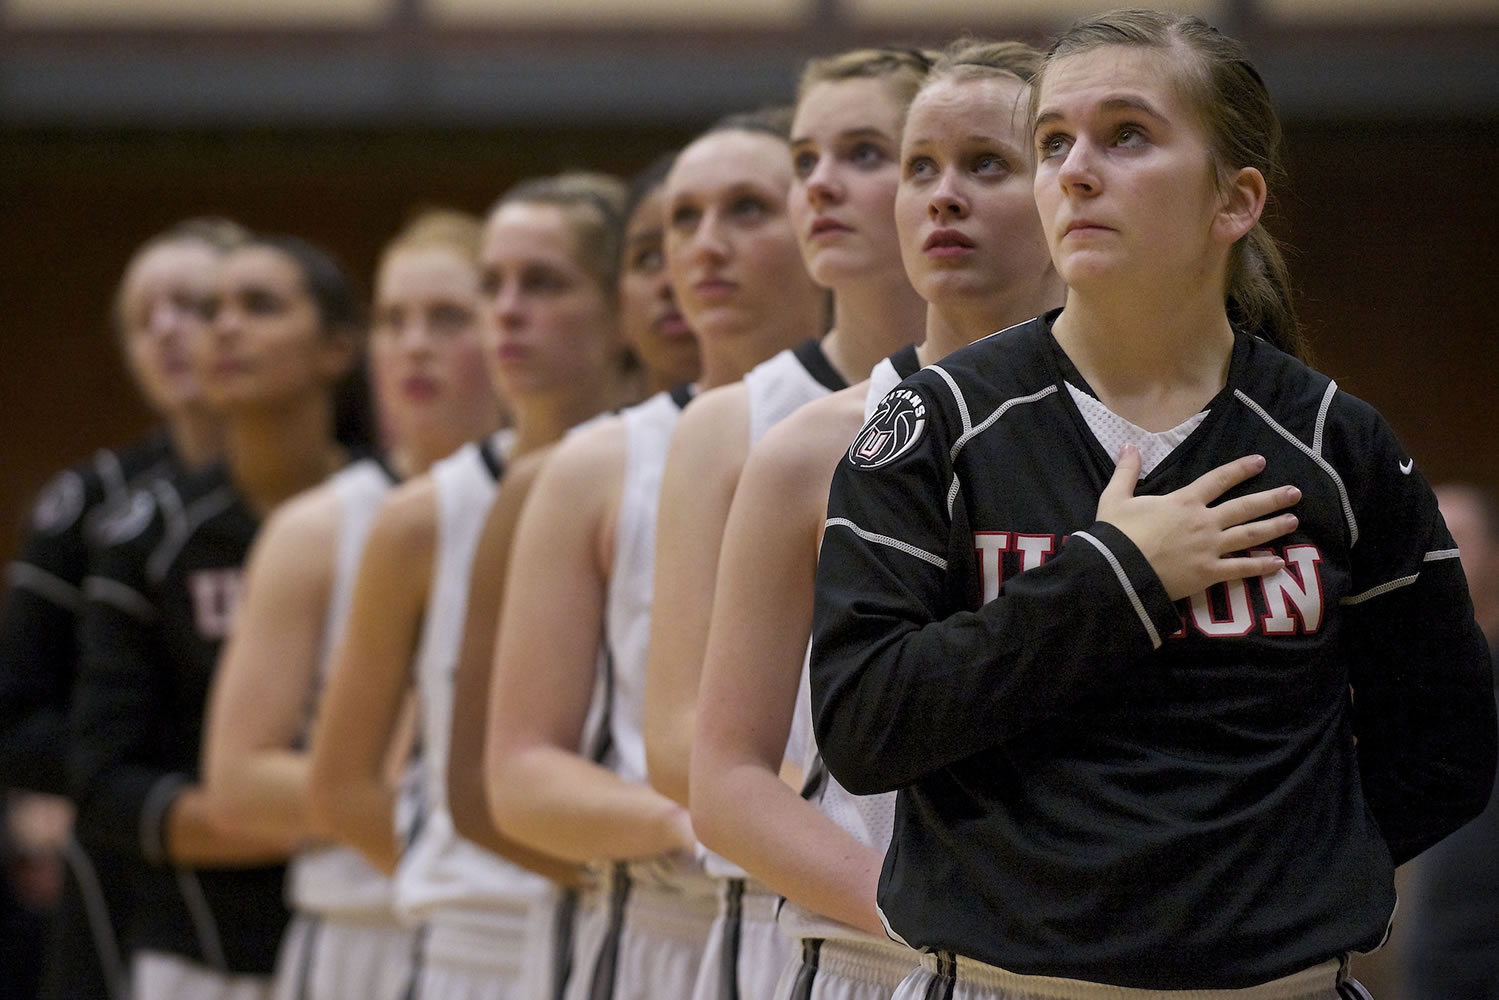 Kendra Preuninger, foreground, stands with her teammates before the start of a game Tuesday.